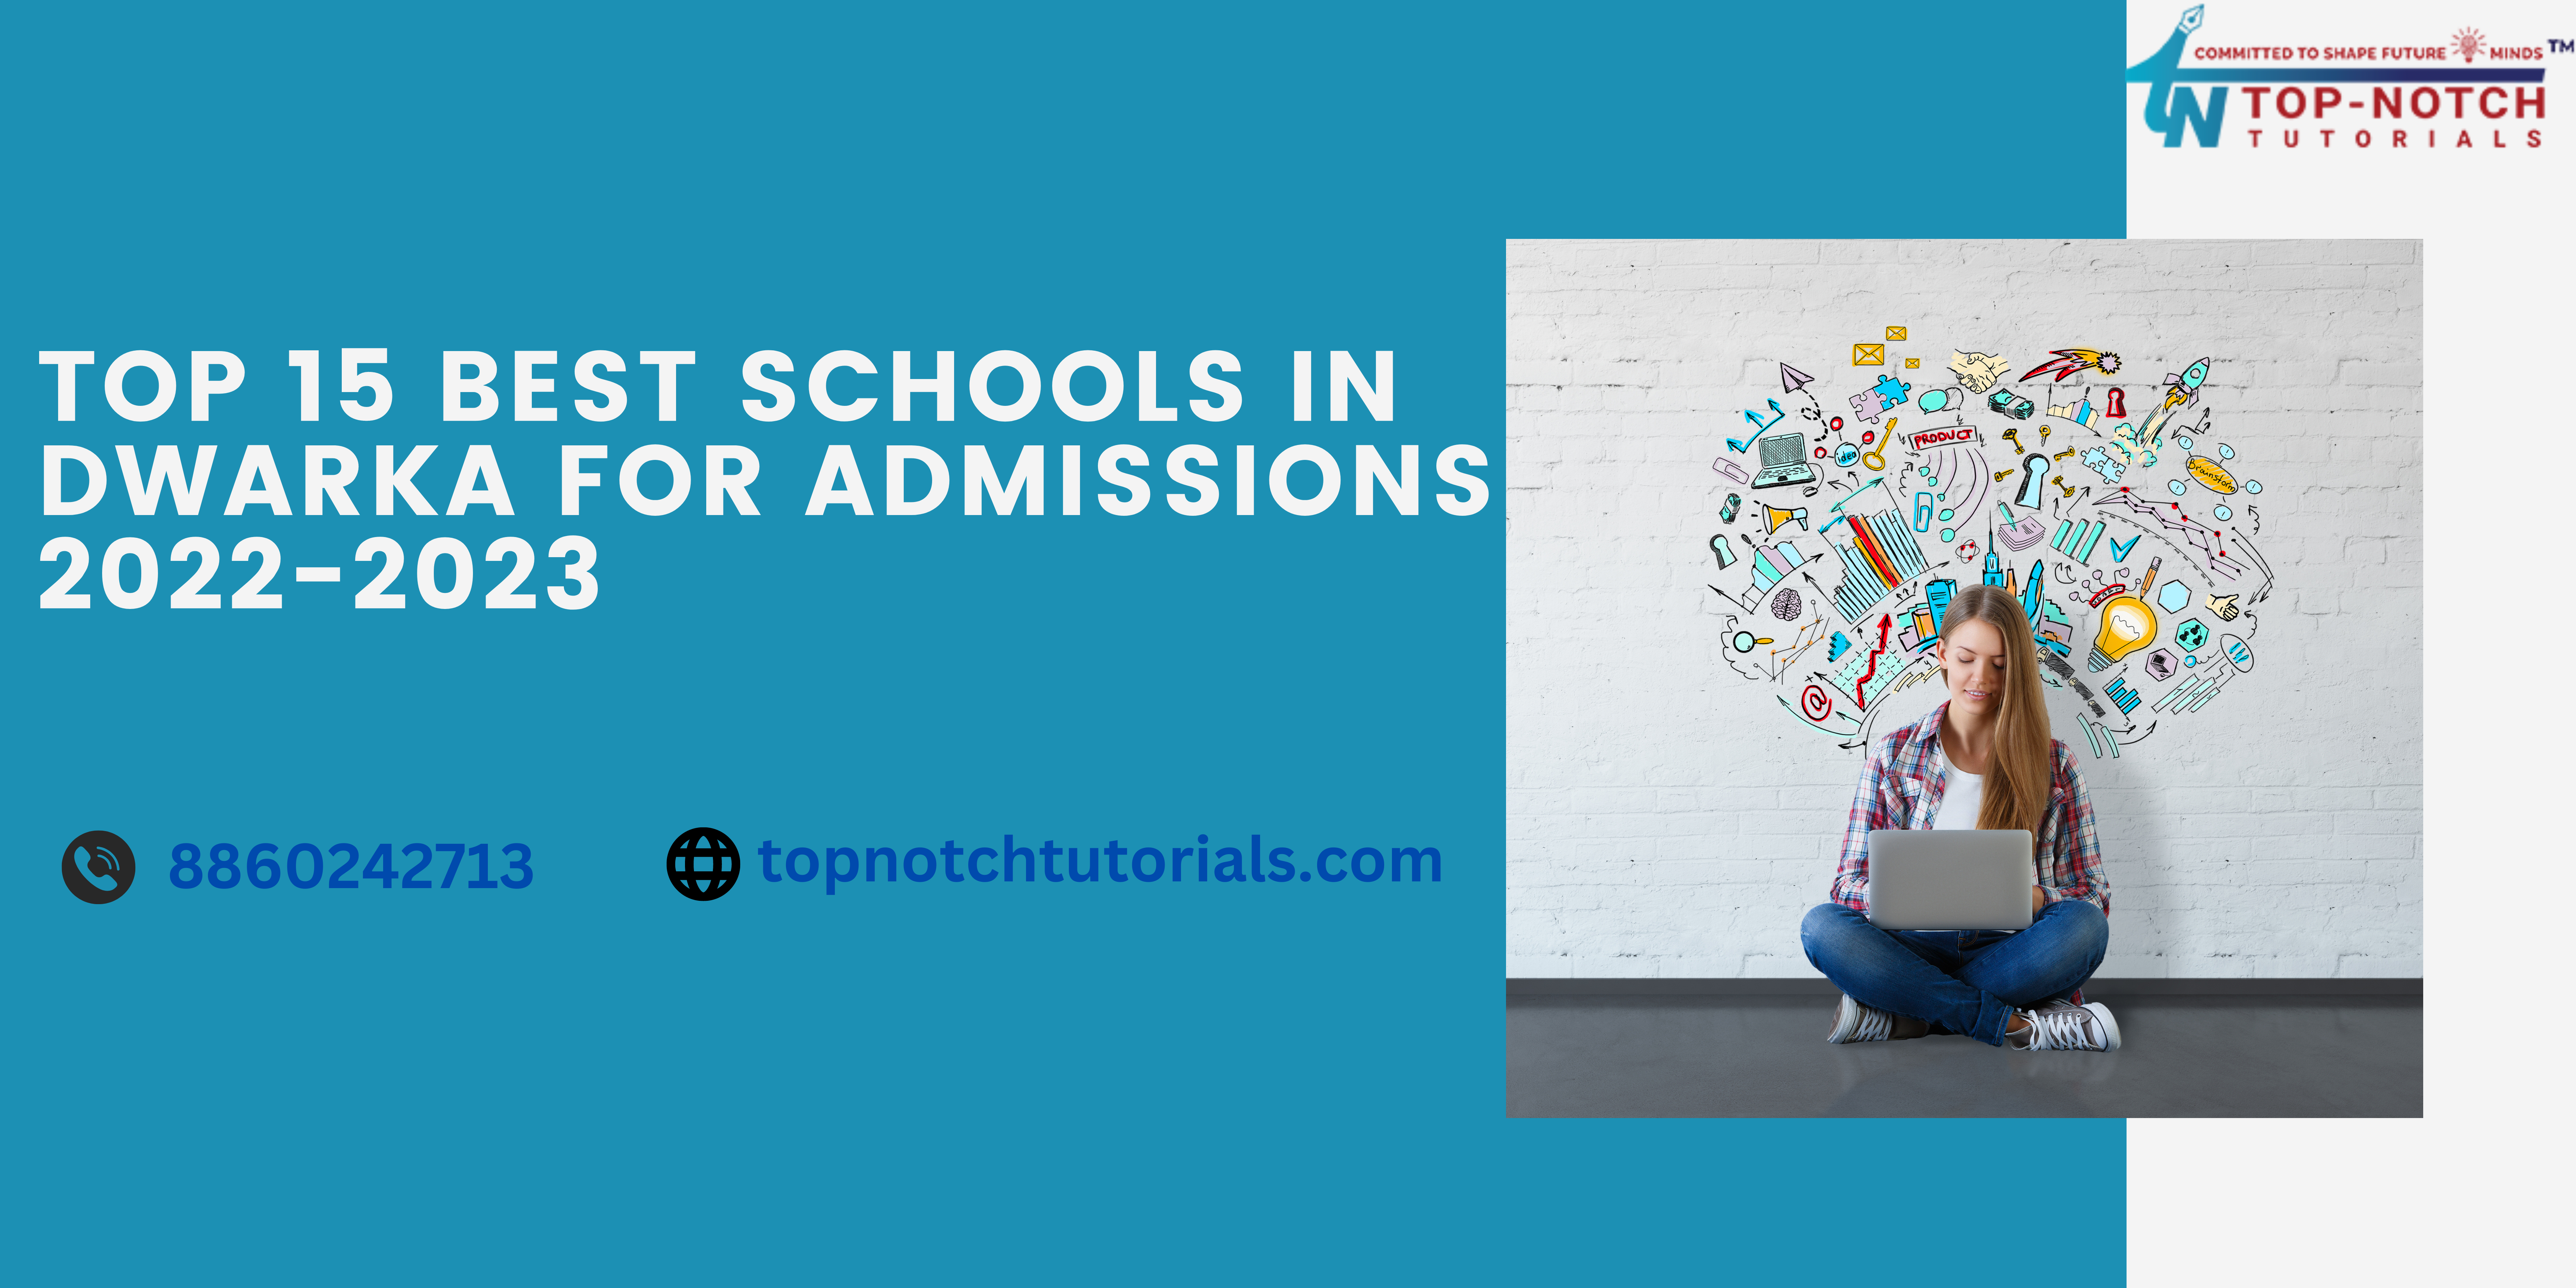 Top 15 Best Schools in Dwarka for Admissions 2022-2023